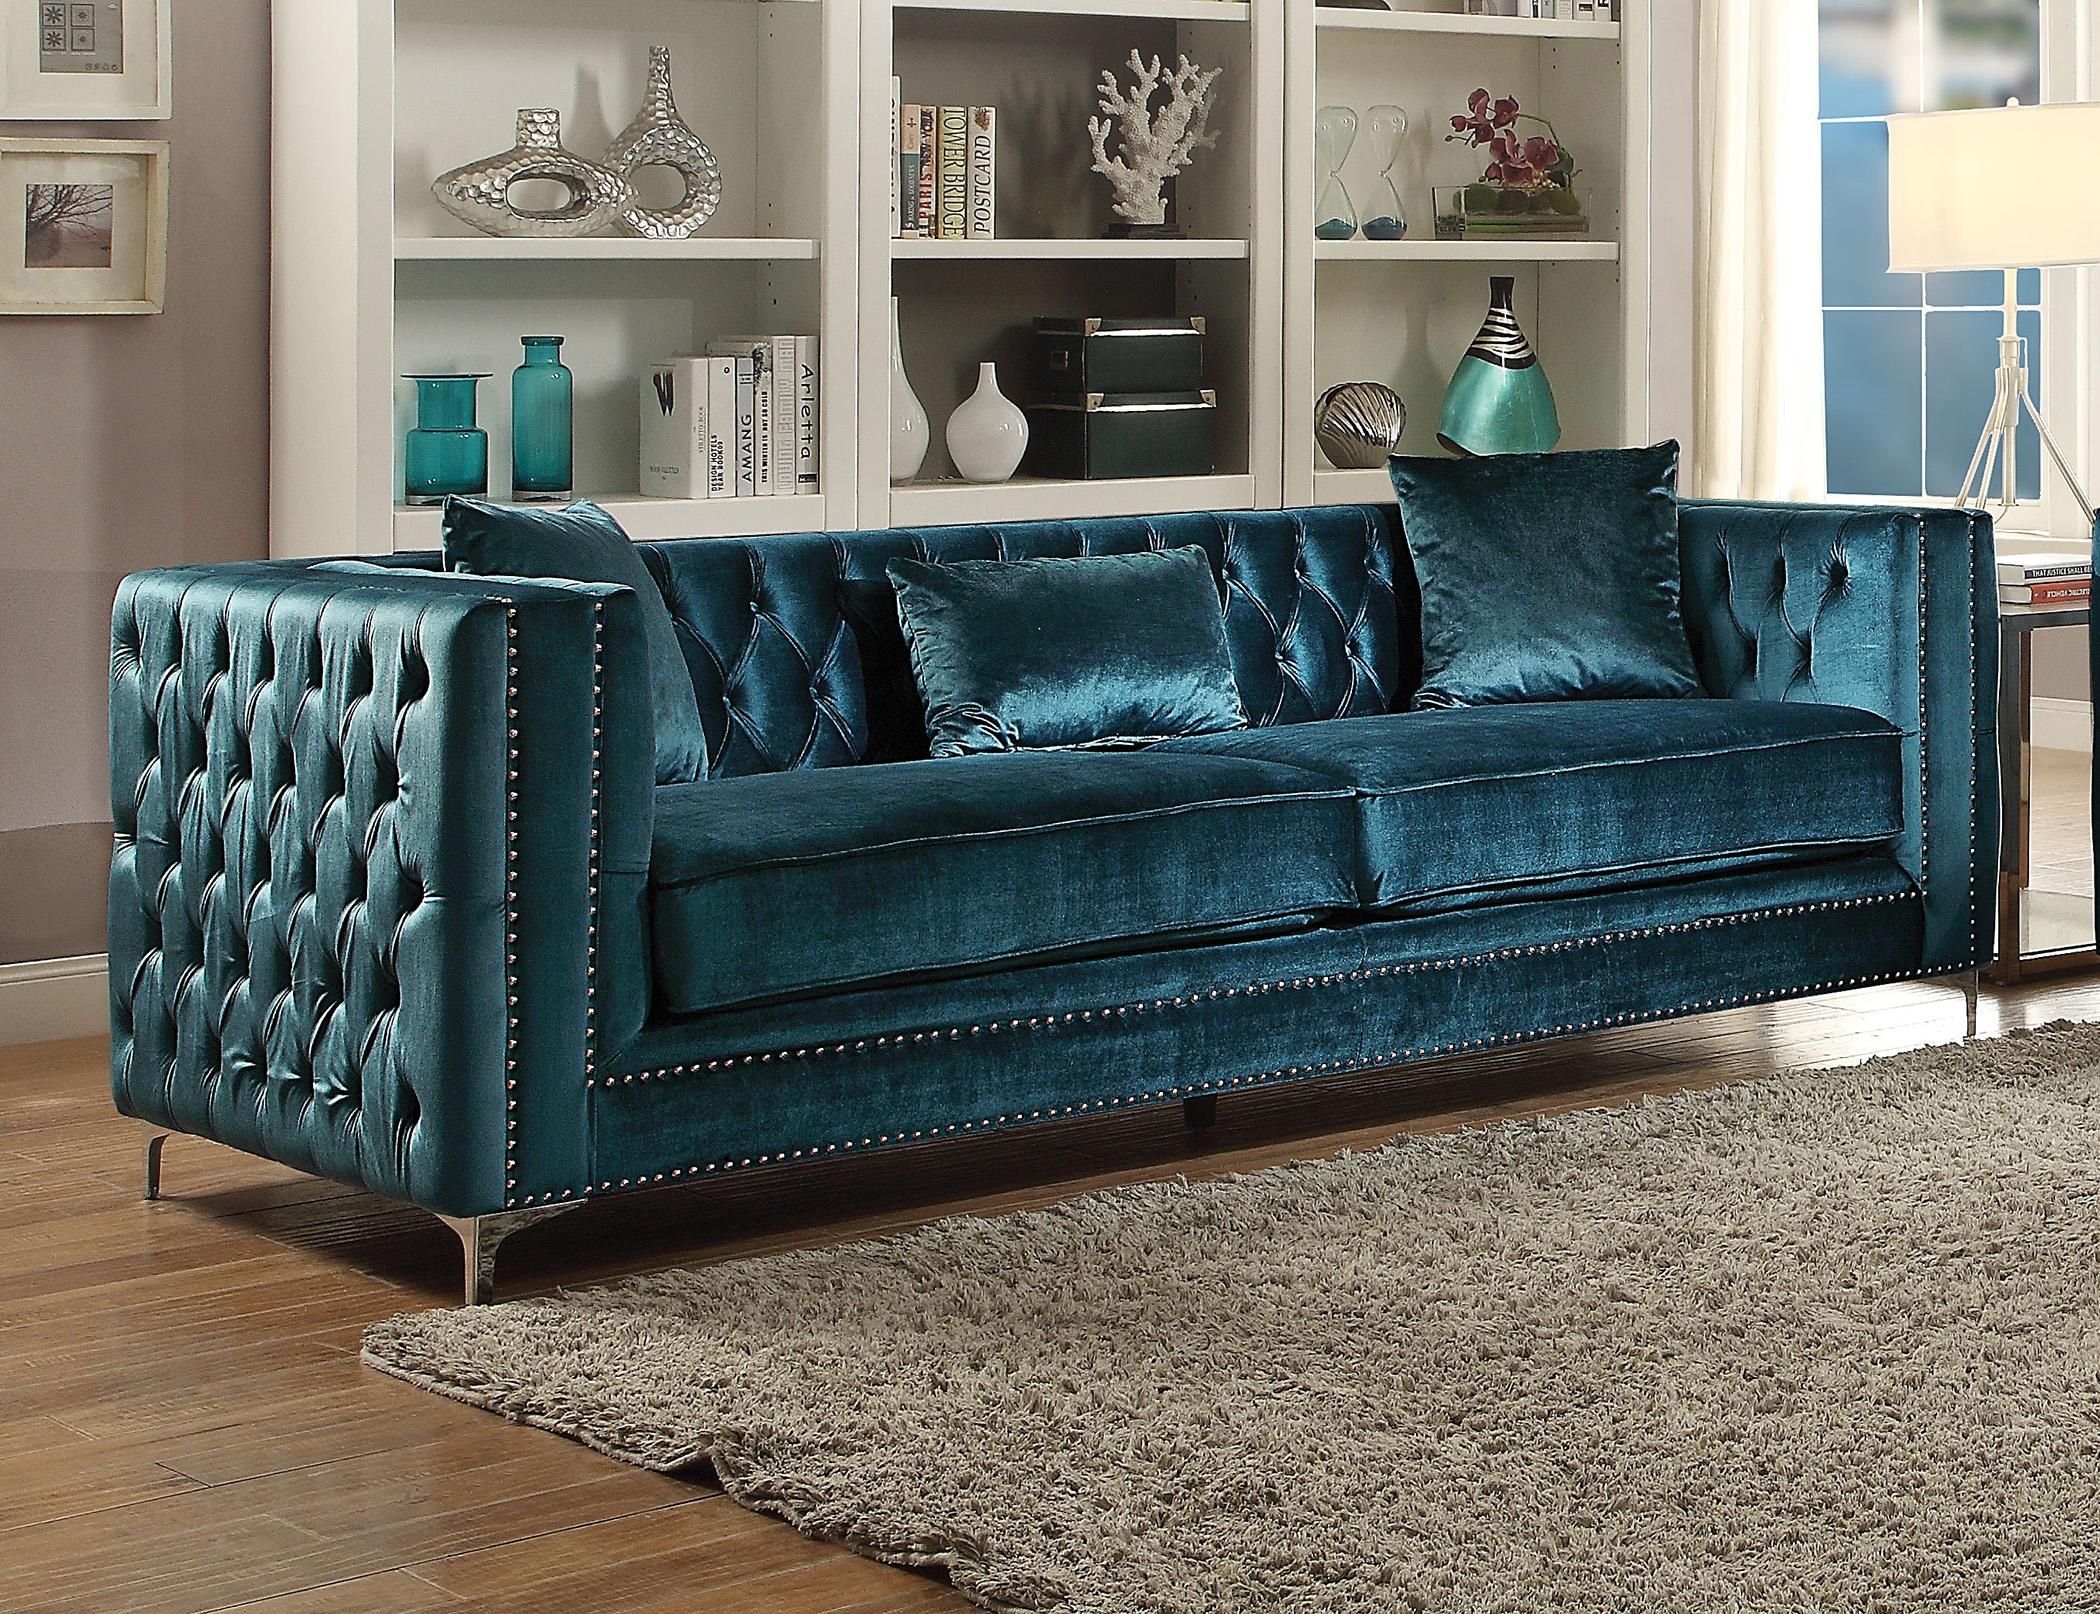 Vintage, Transitional Sofas Gillian-52790 52790 in Teal Fabric